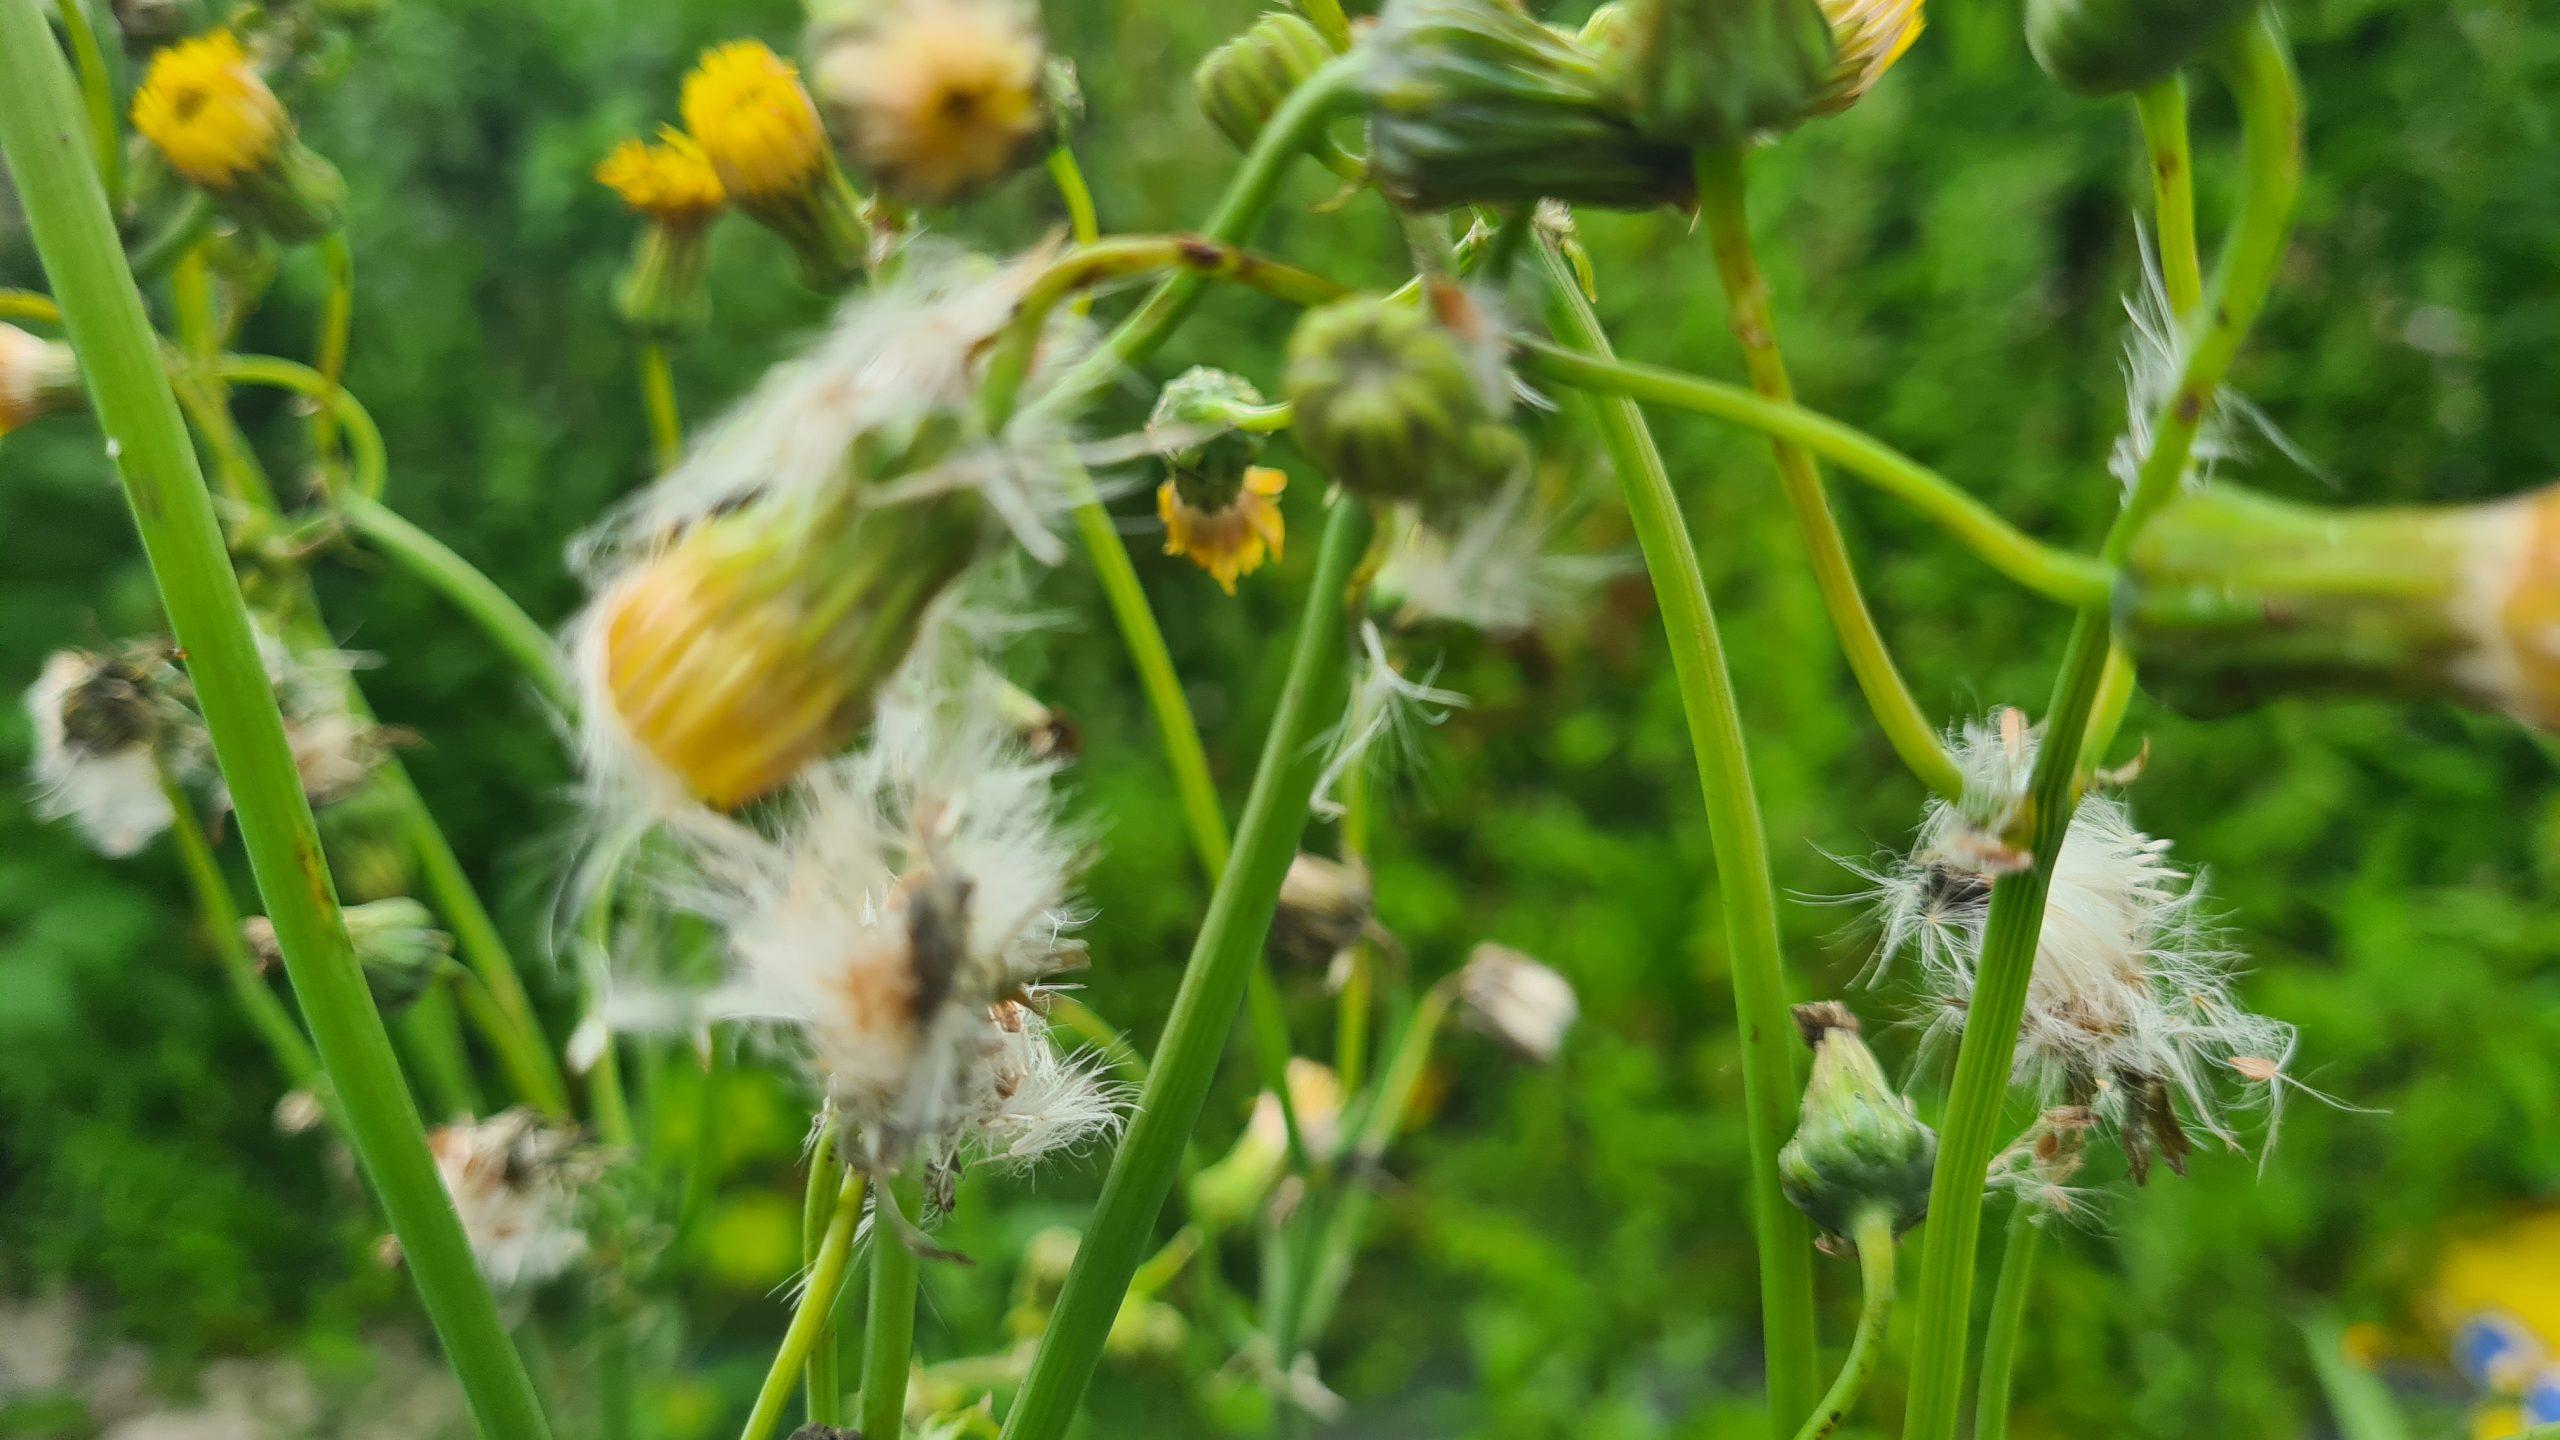 Dandelions blossoming with seed in early summer